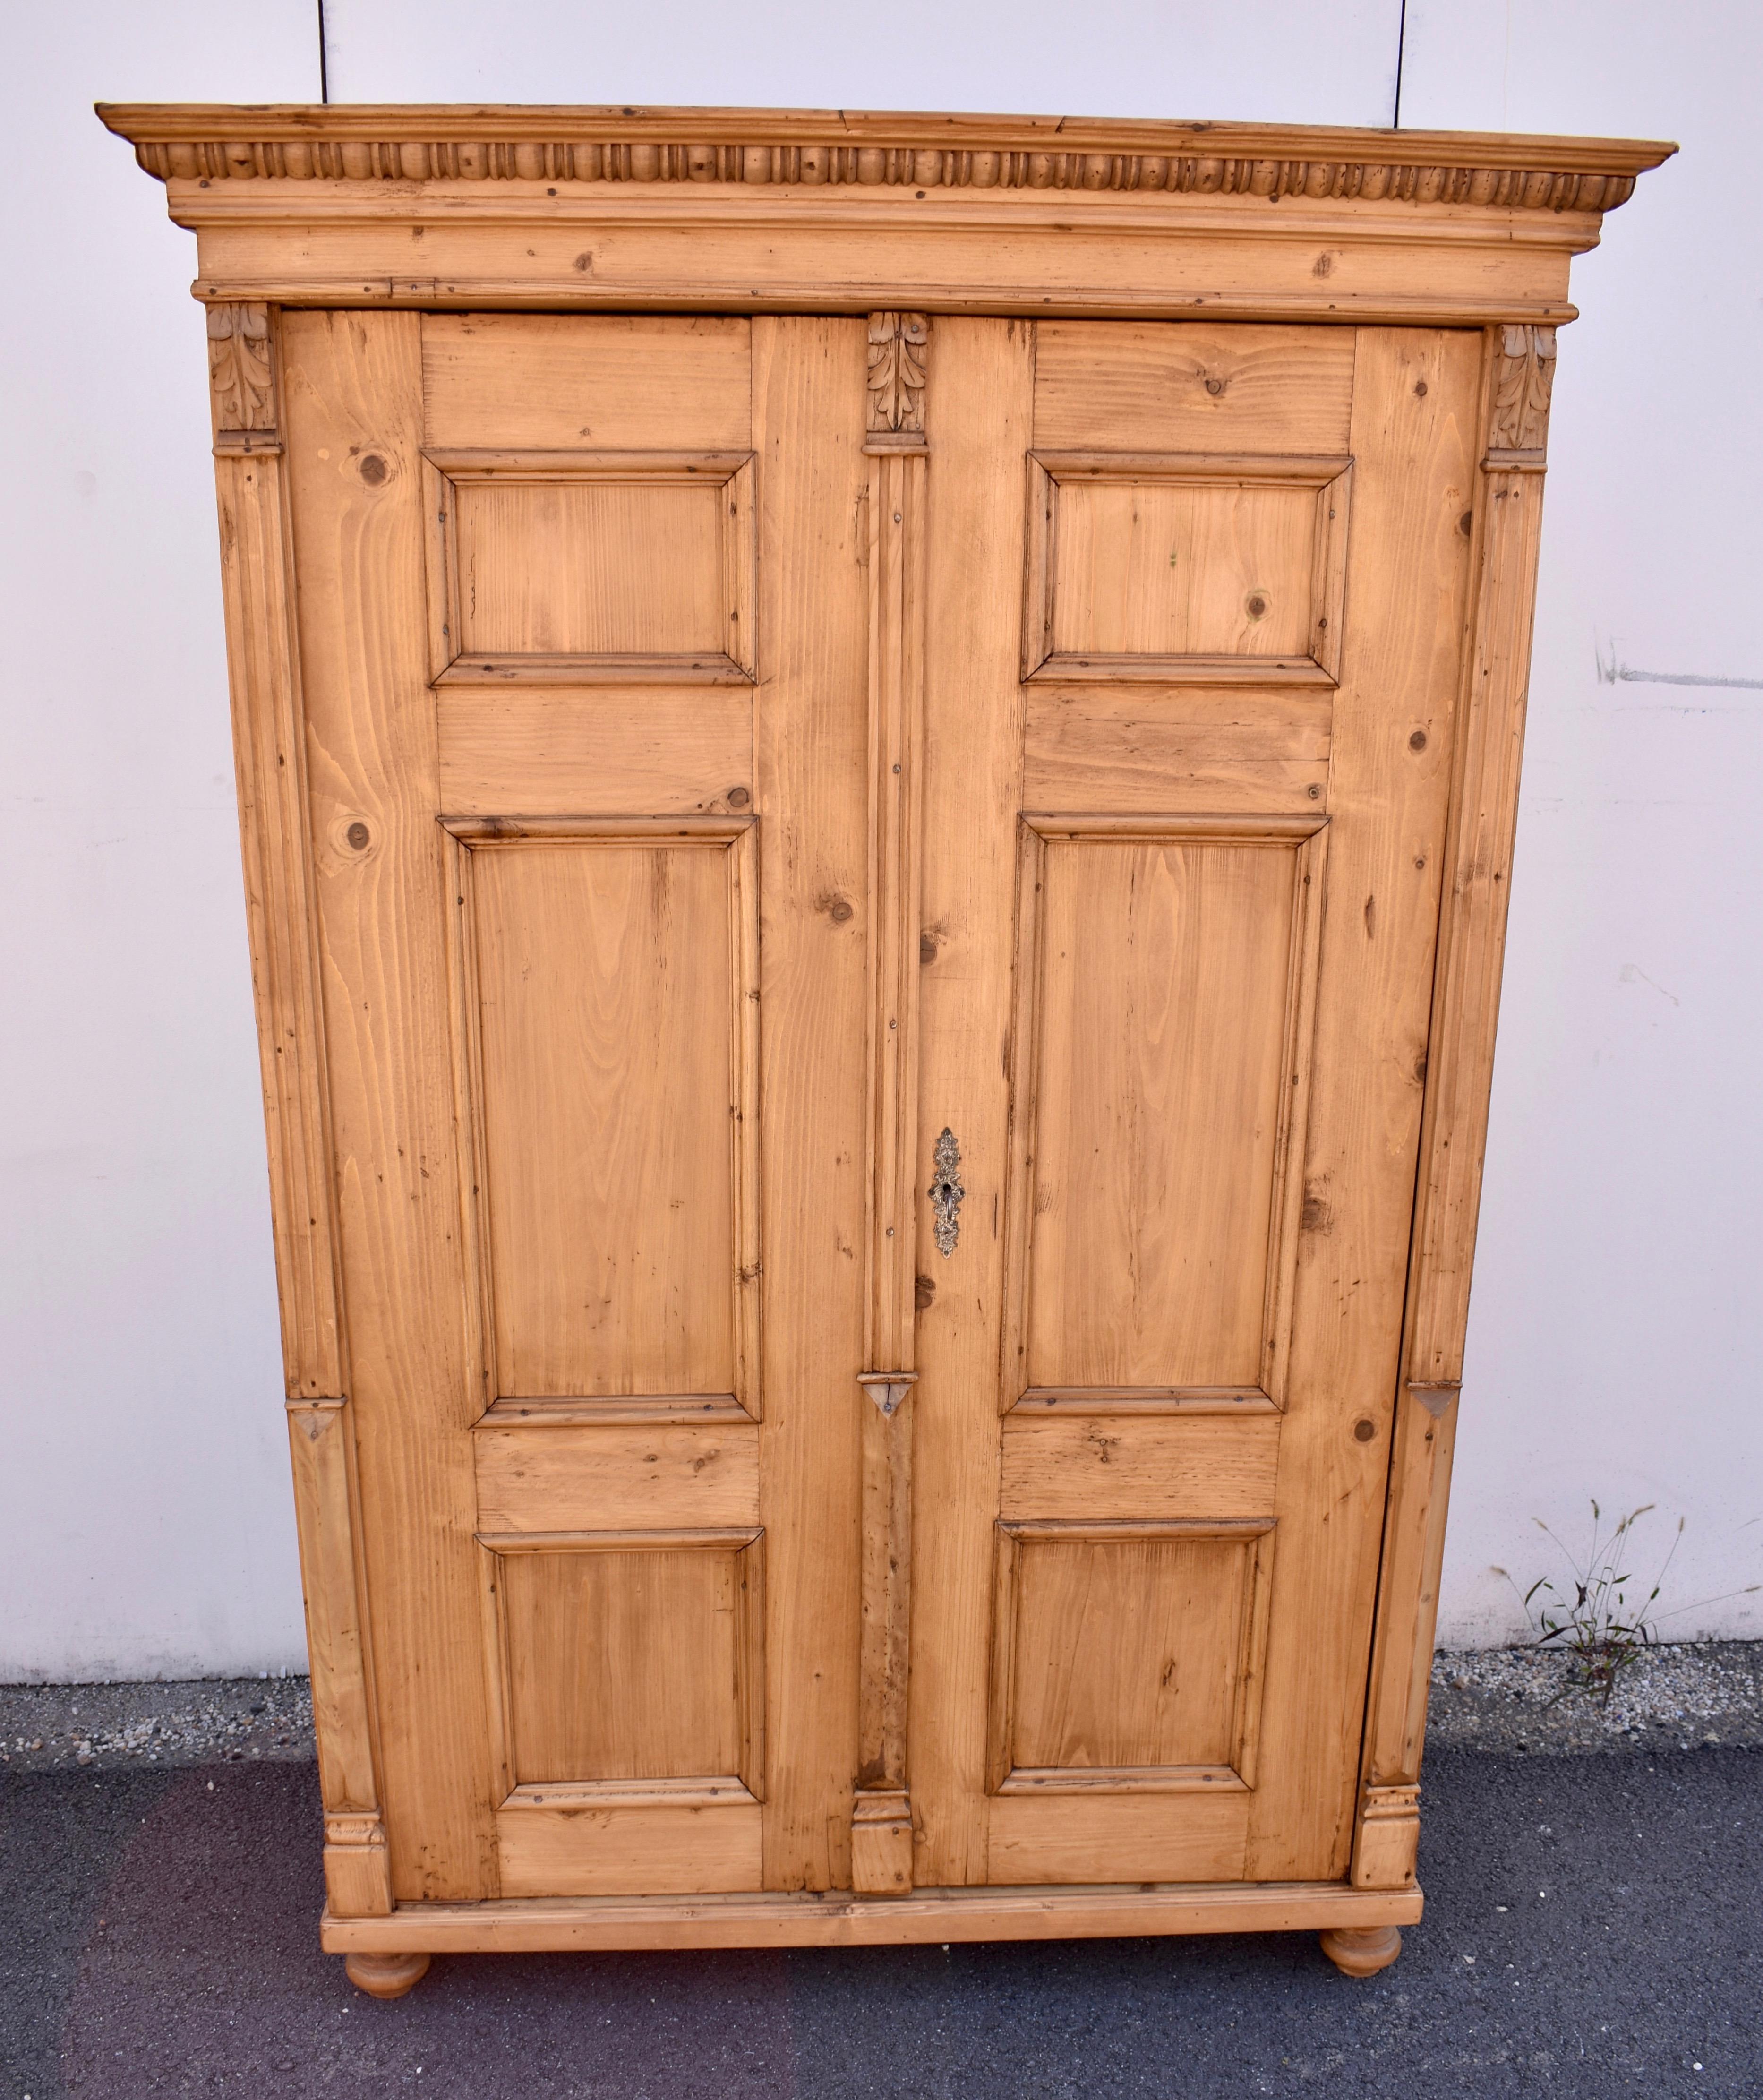 This is an attractive two door armoire with only very small knots and a nice even honey color, hand-polished to a lovely sheen.  Several tiers of molding, including a strip of quarter round gadroon, make up the impressive crown.  The doors each have